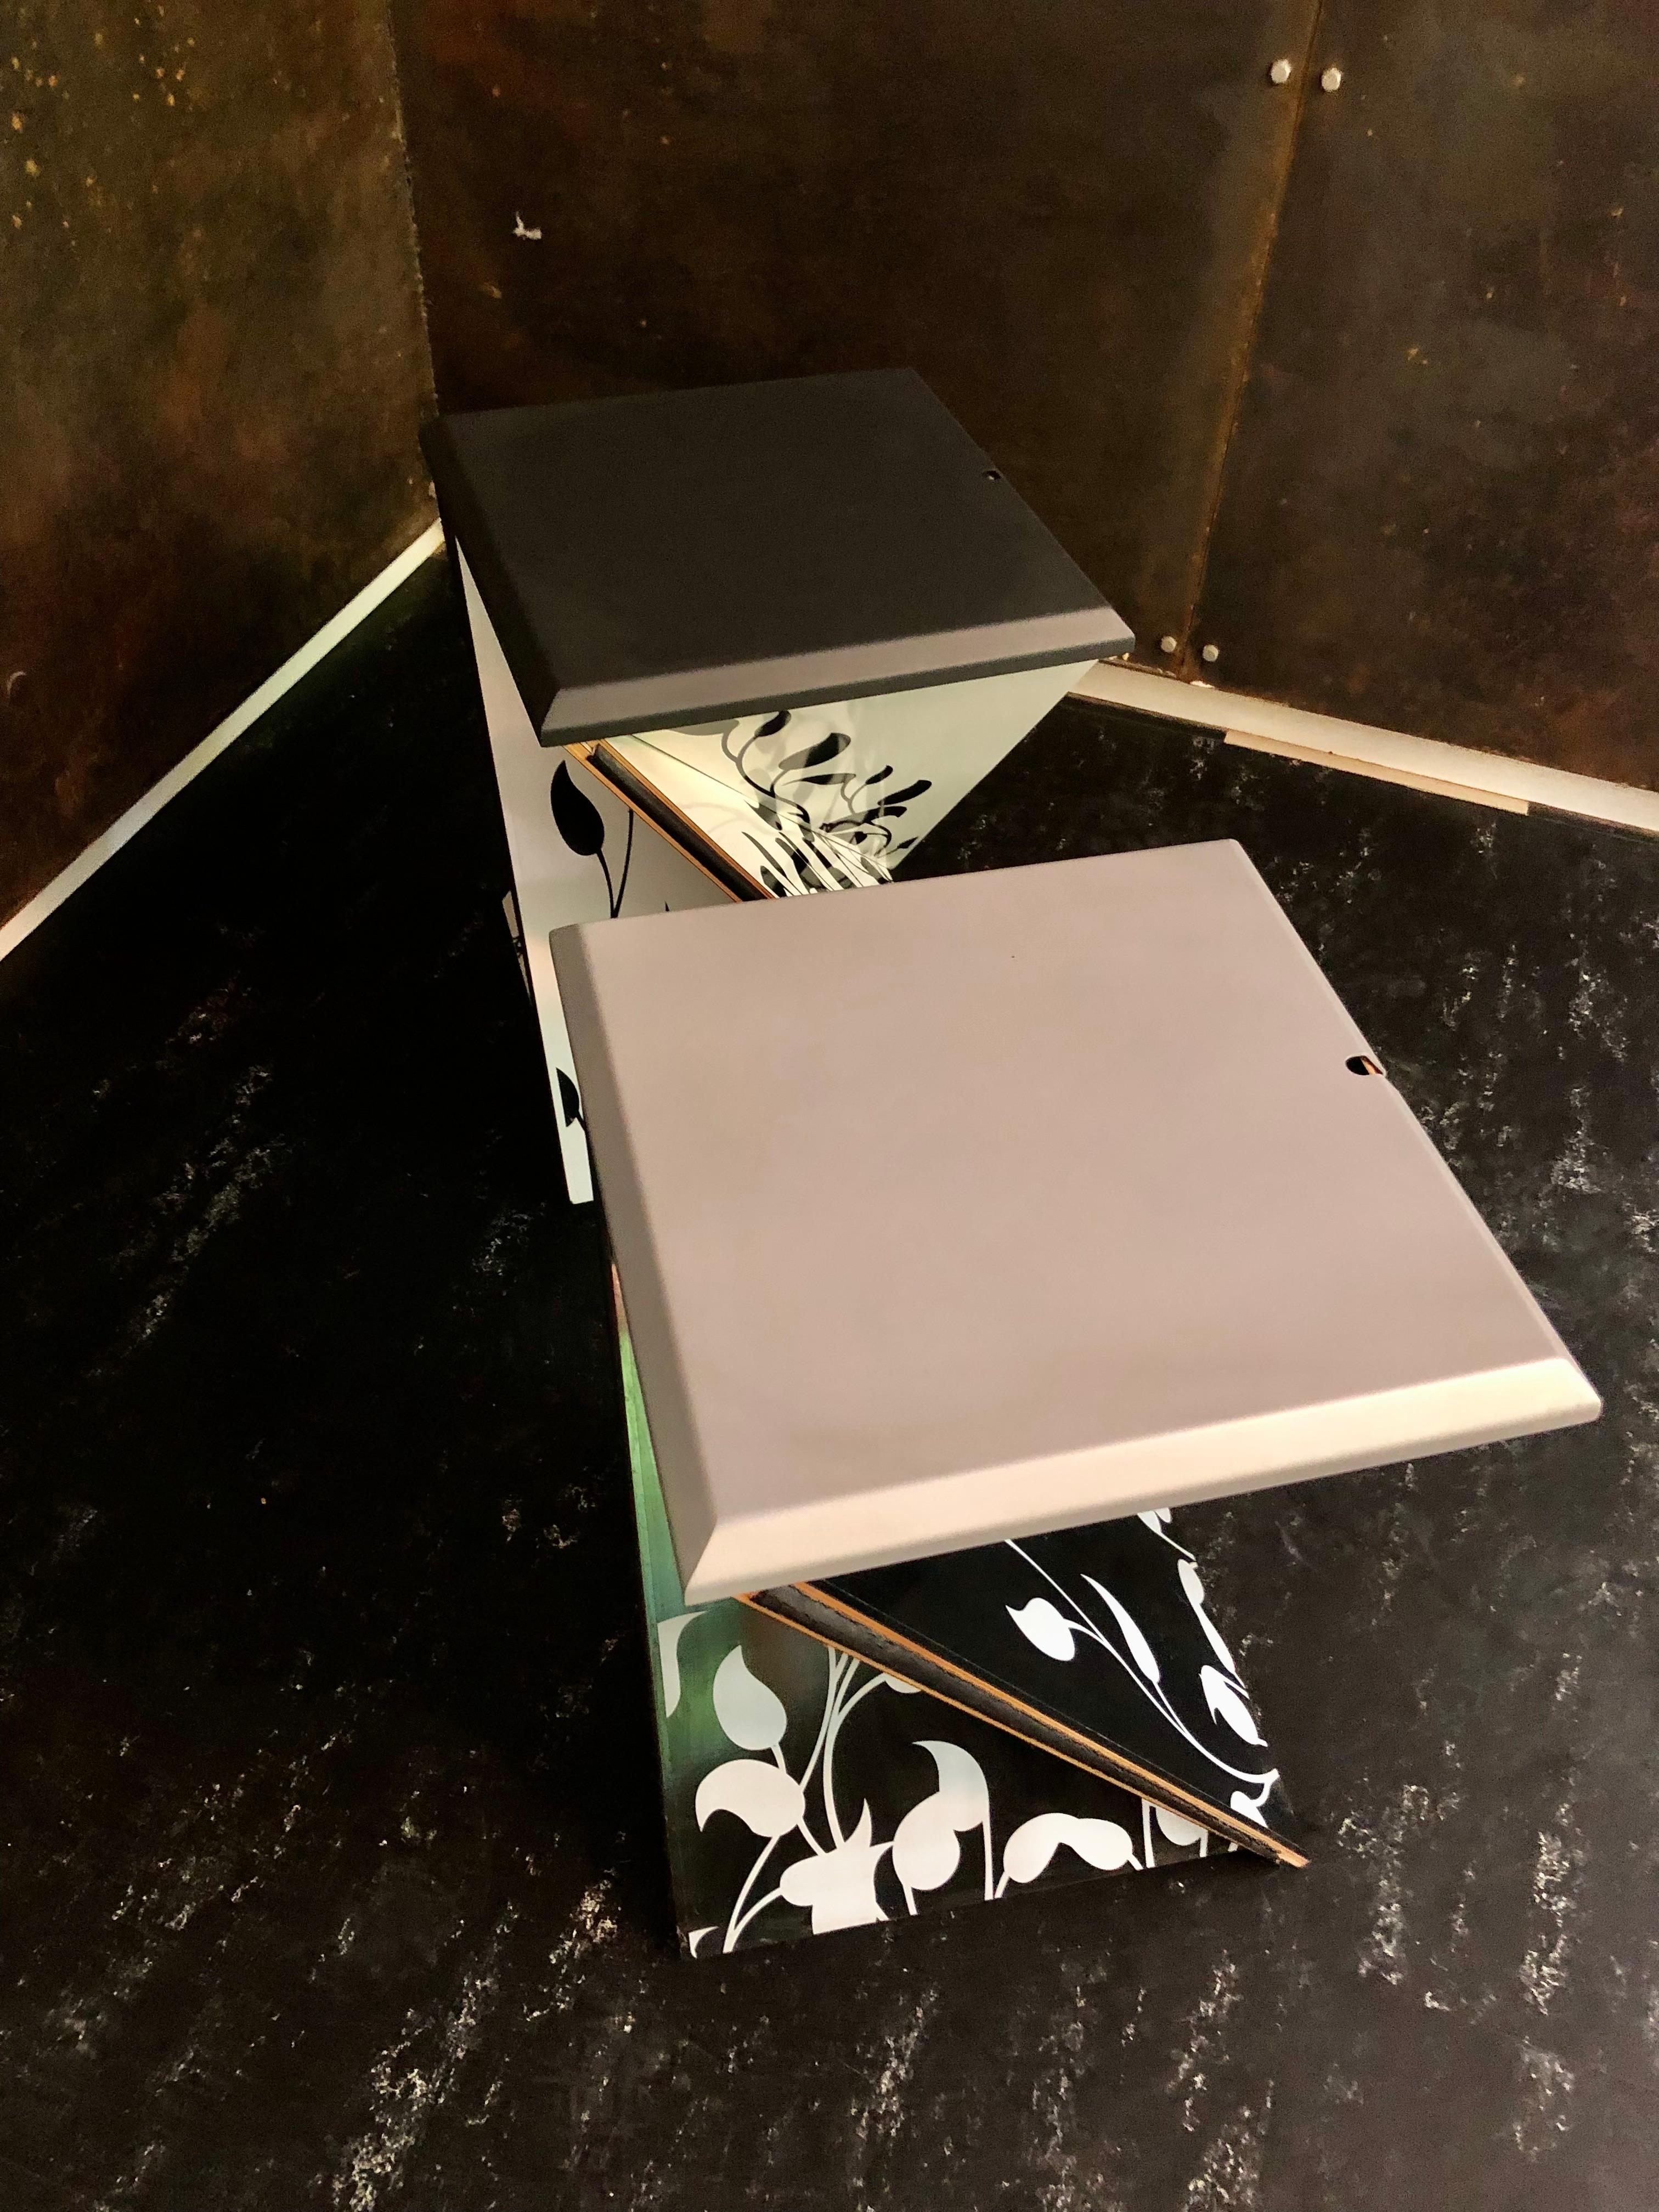 Danese Milano Kada foldable stool / side table designed by Yves Behar. To use as a stool or side table, top or seat is removable and can be used as a tray. It is made of black and white  laminated birch wood, black metal leaf / seat with a fashion